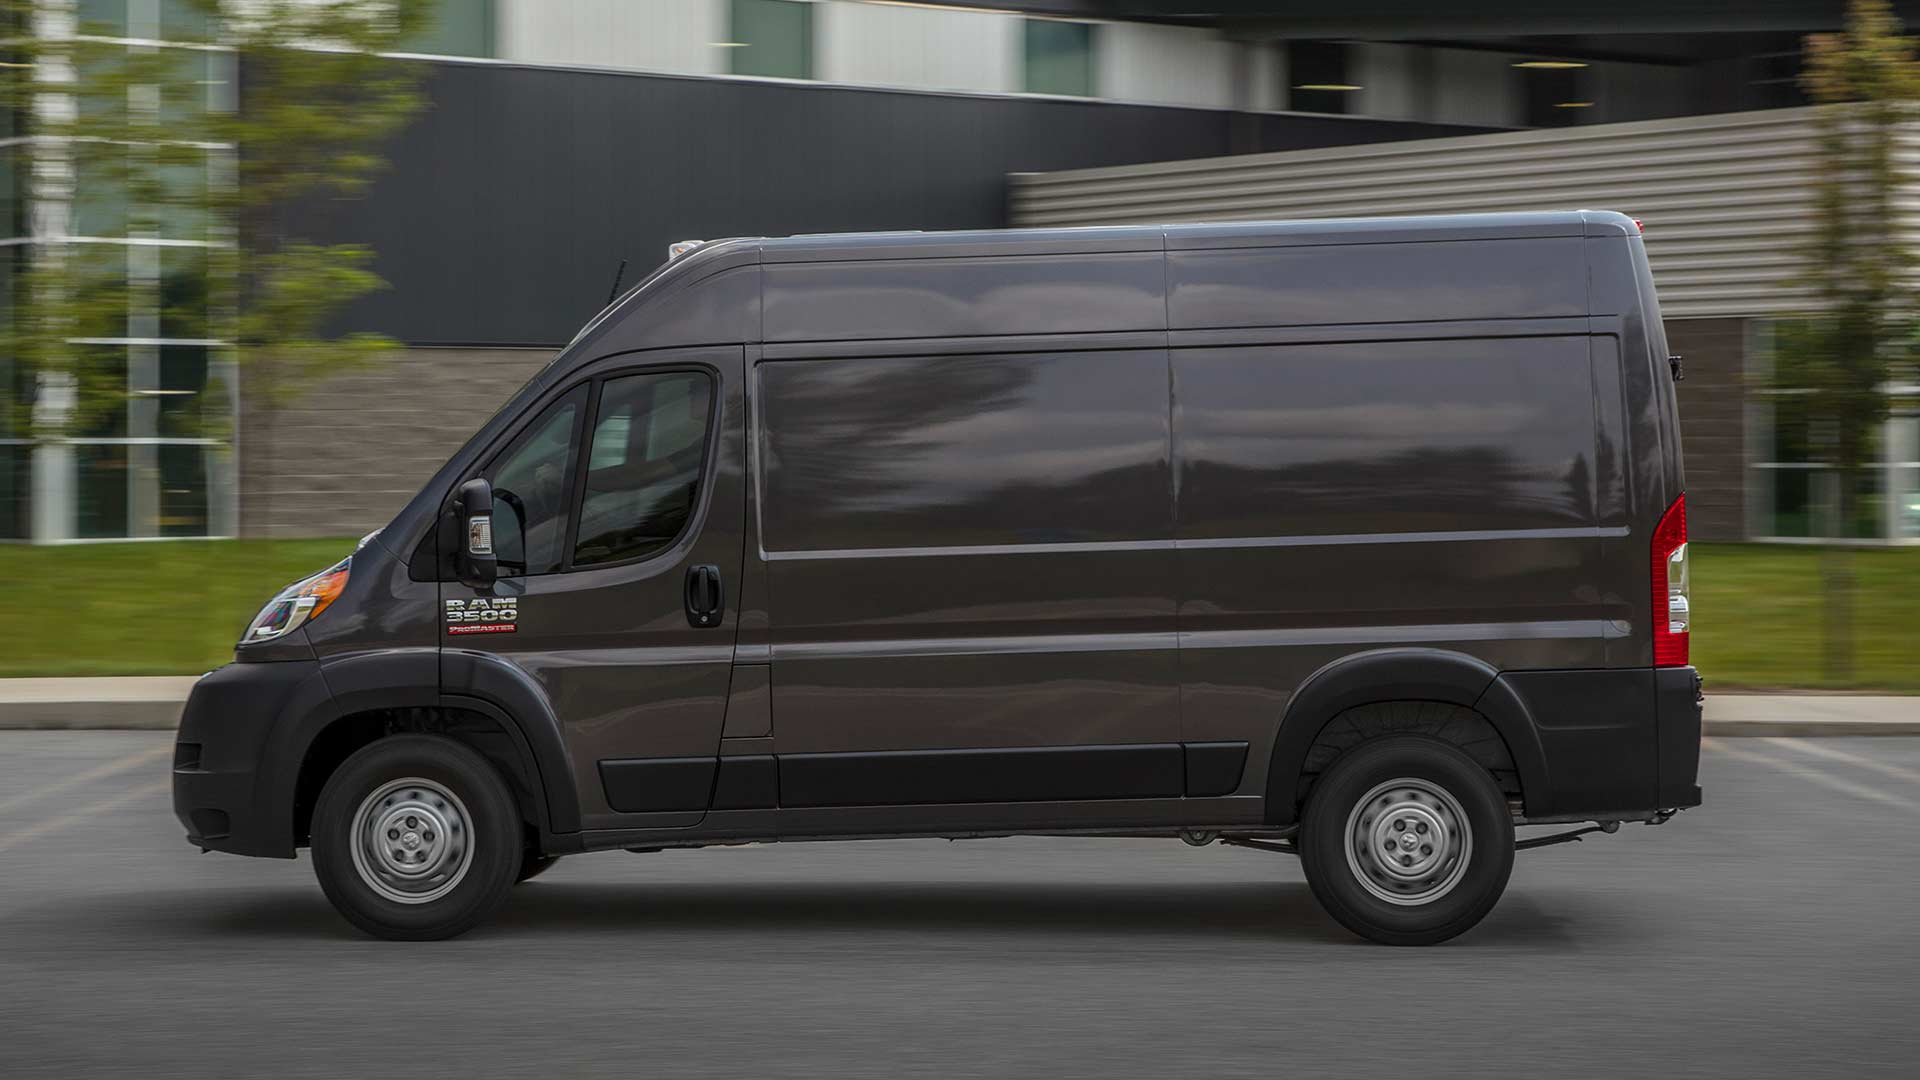 Display A side profile of a 2022 Ram ProMaster being driven on a residential street.